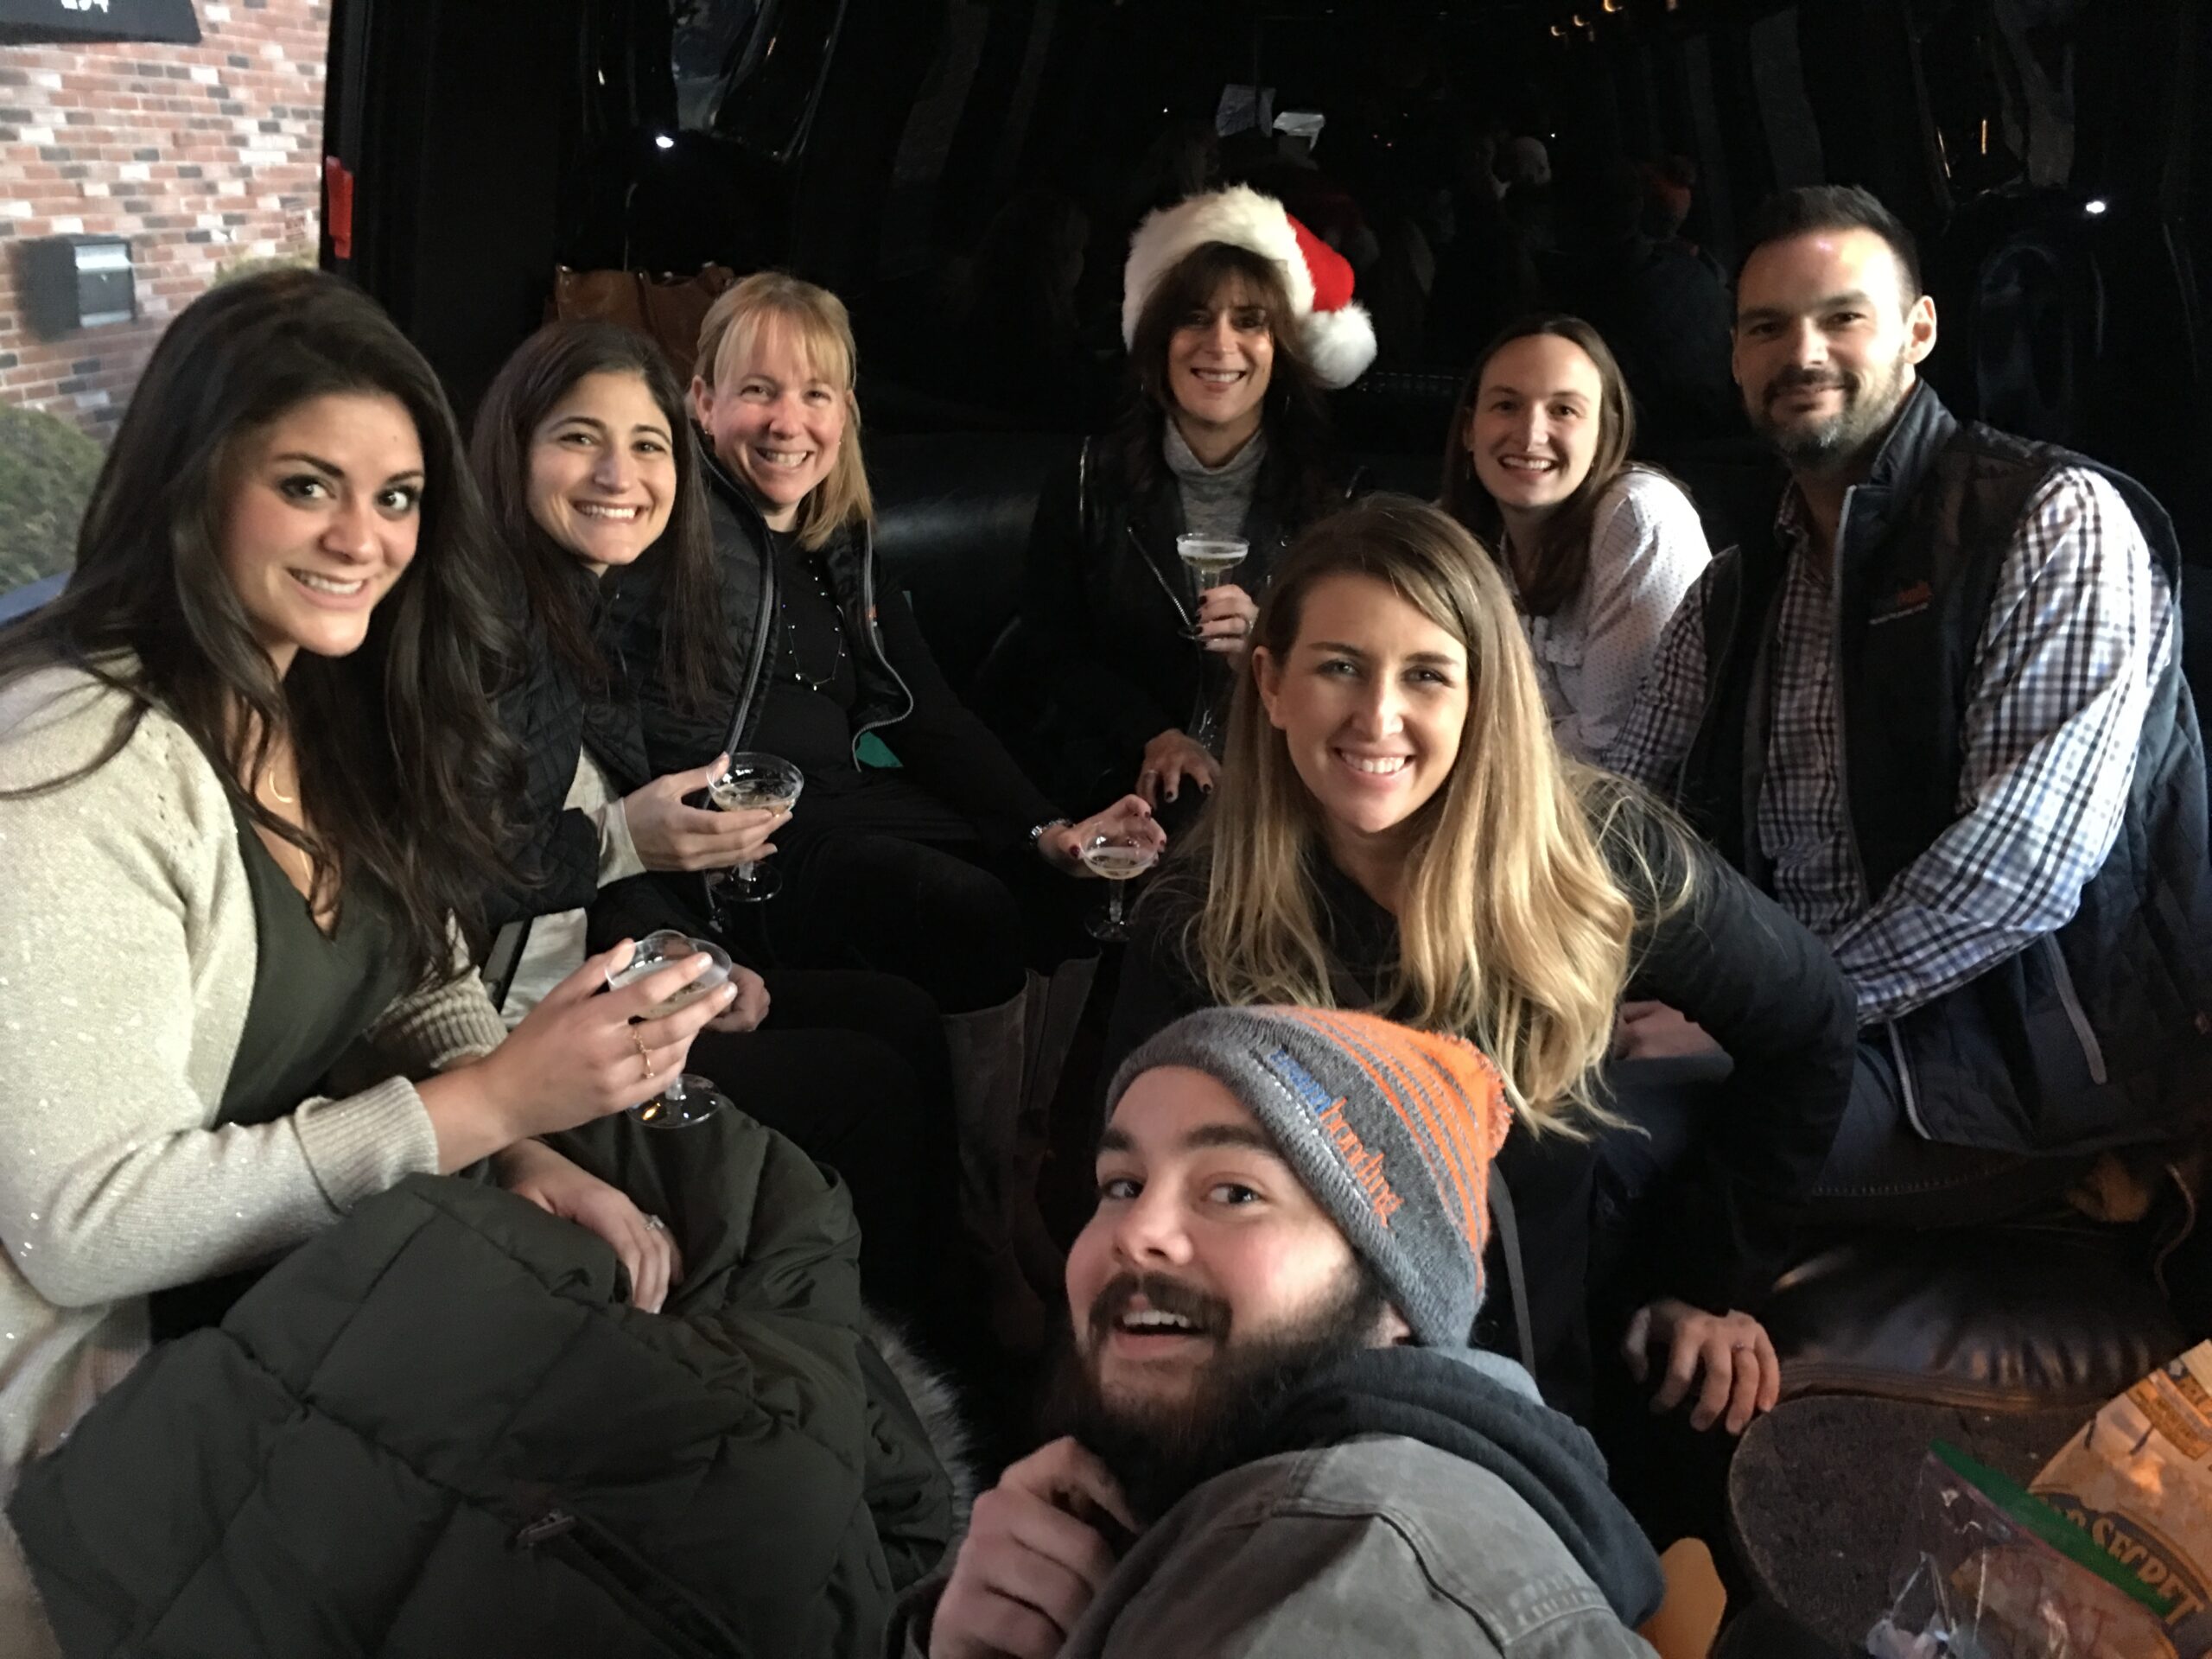 Mystery Bus office holiday party ideas